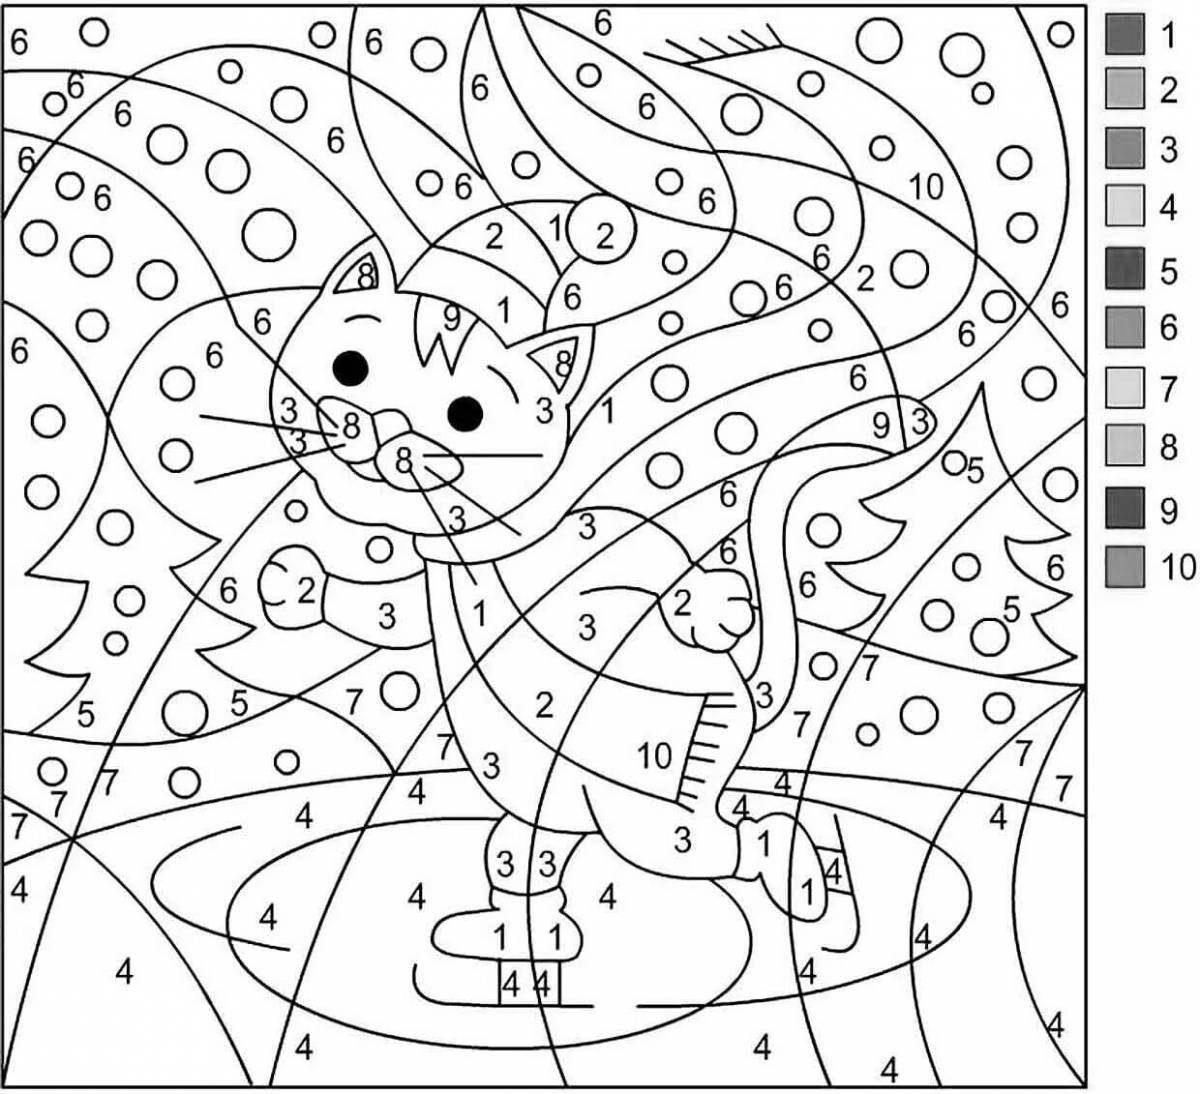 Fun coloring by numbers up to 10